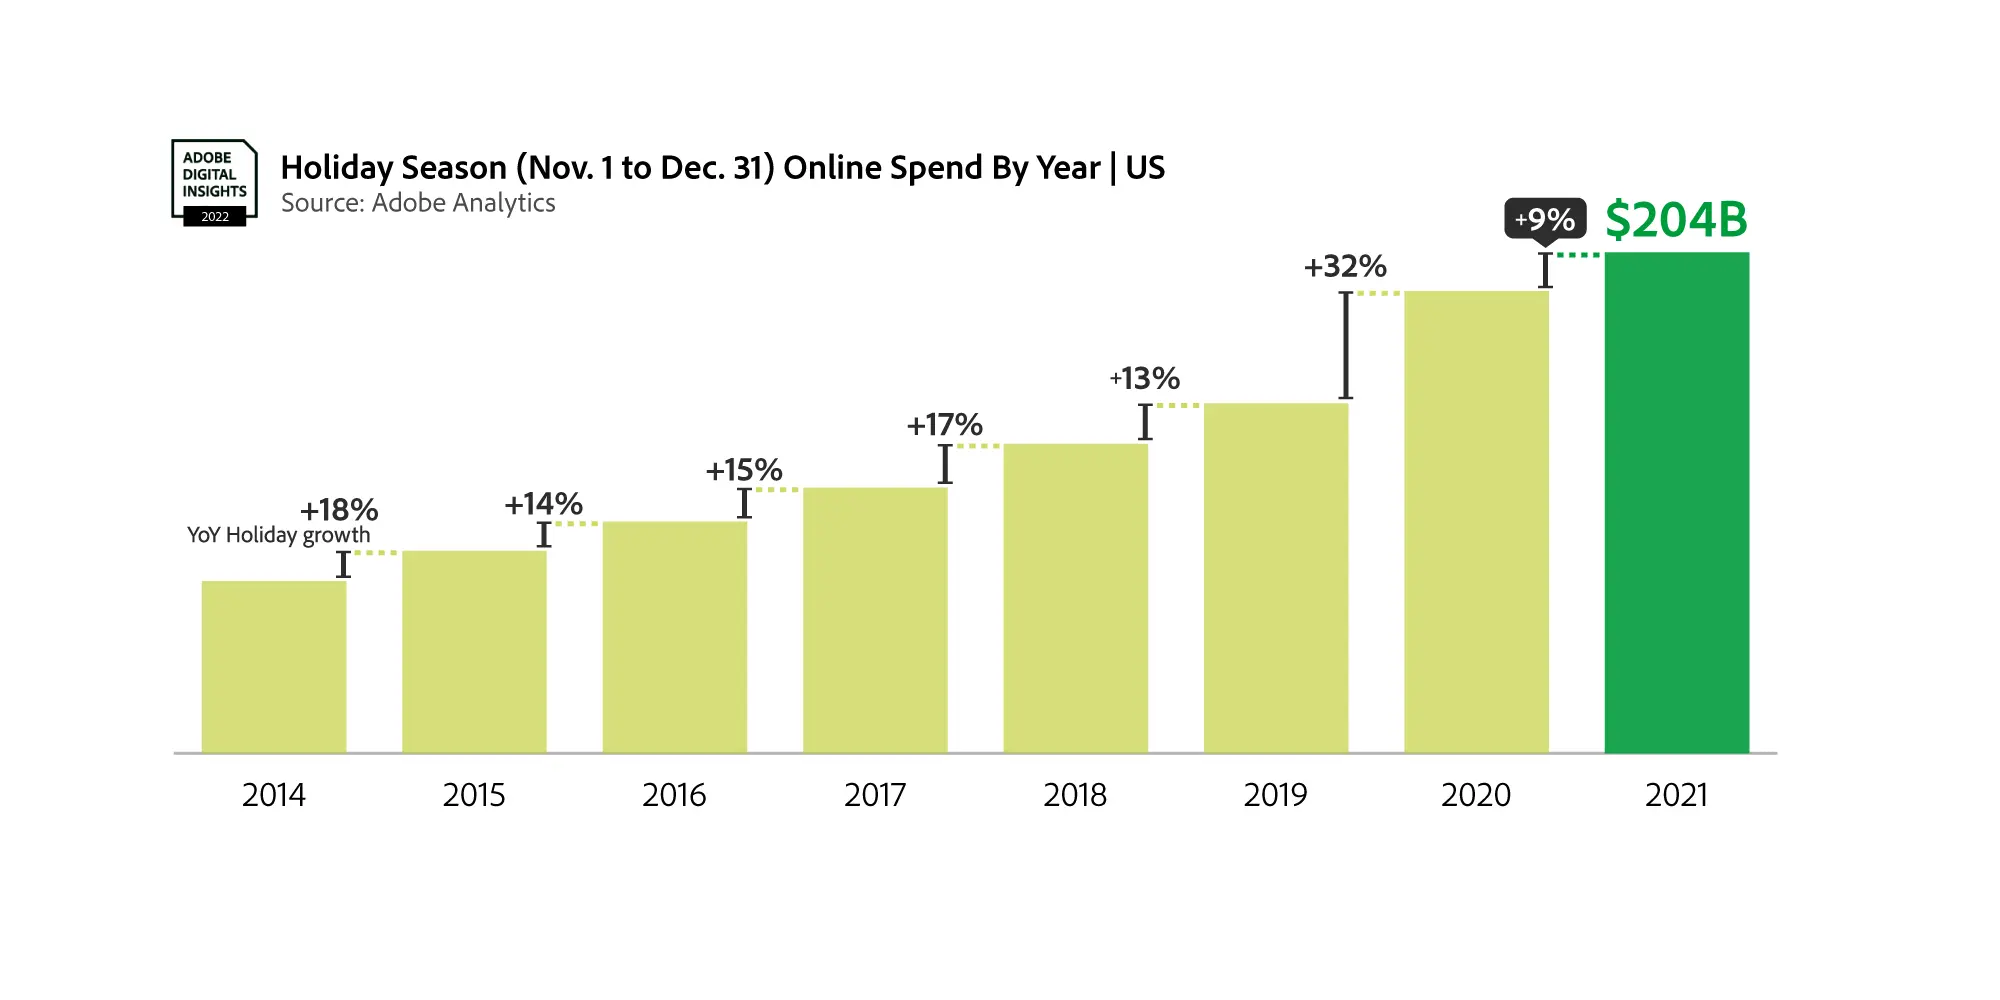 Graph of Online spend by year. 